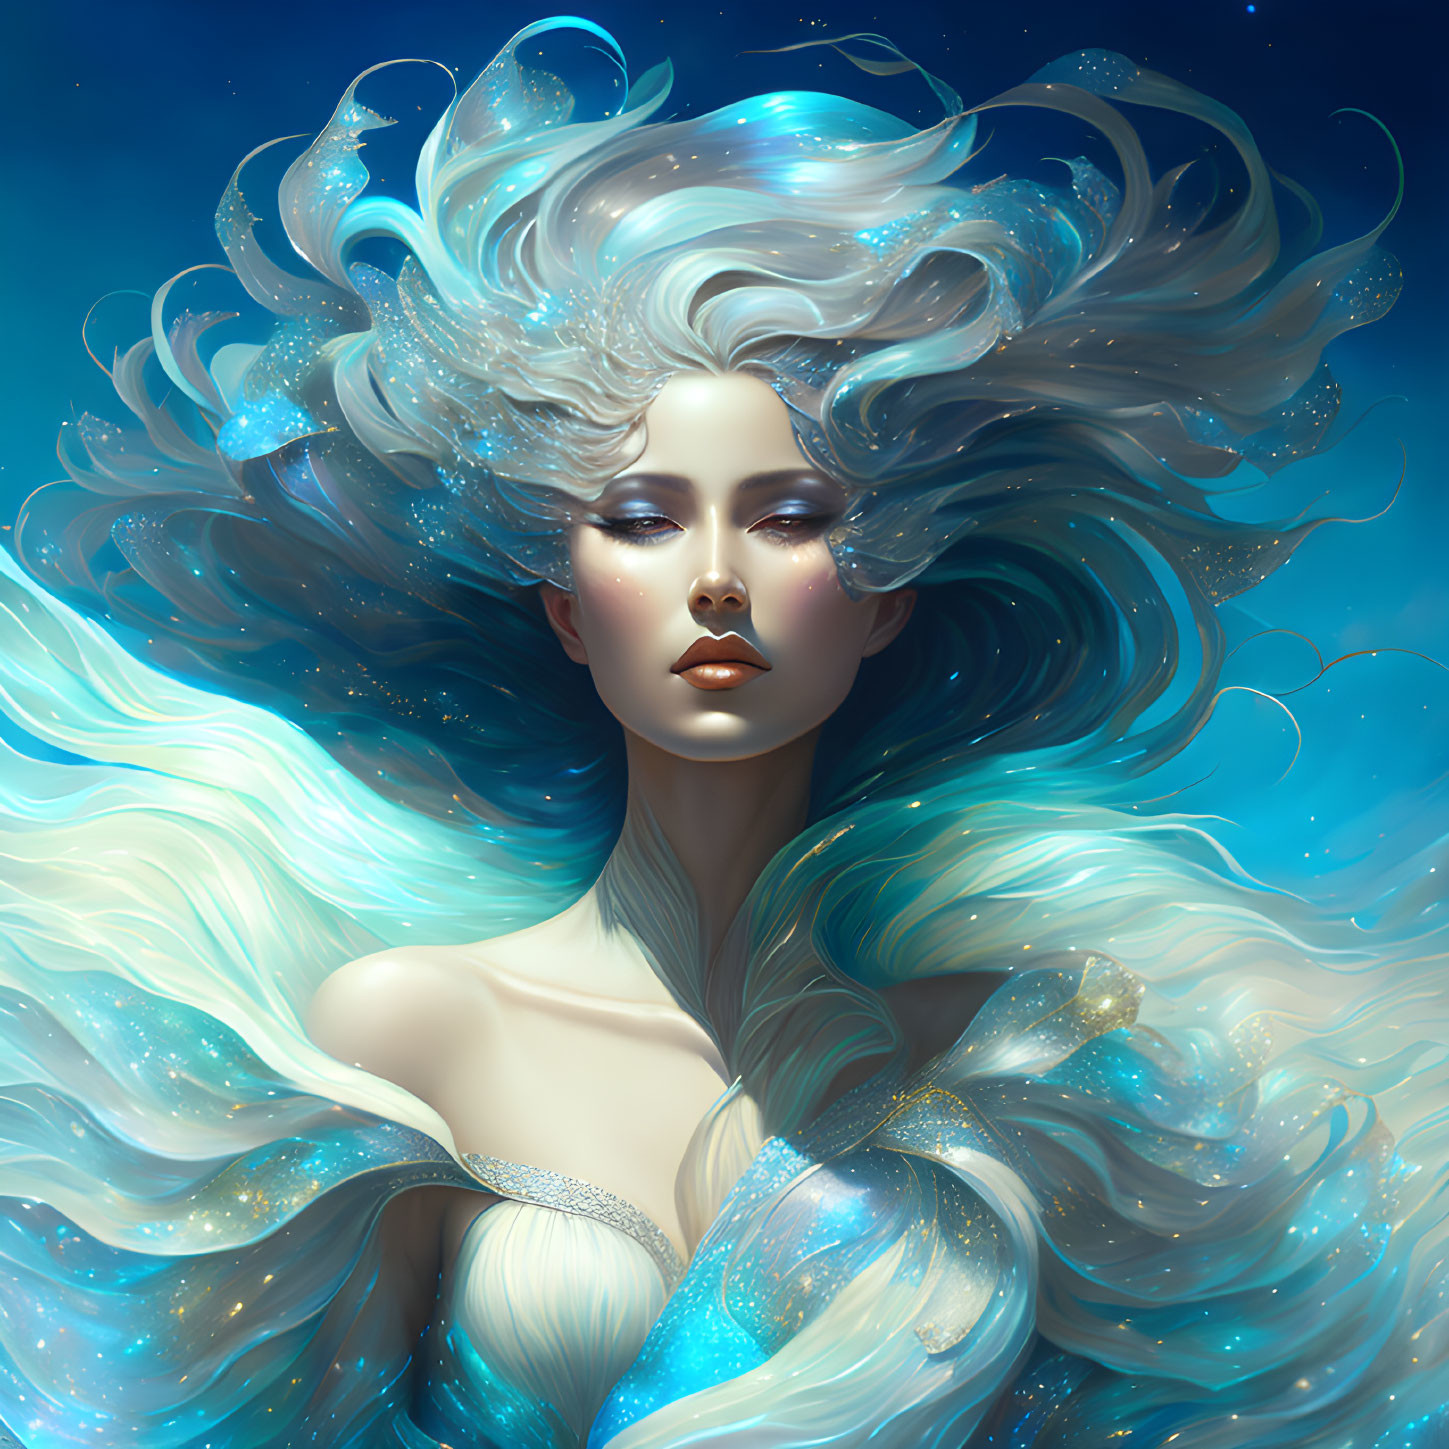 She is Water and Wind